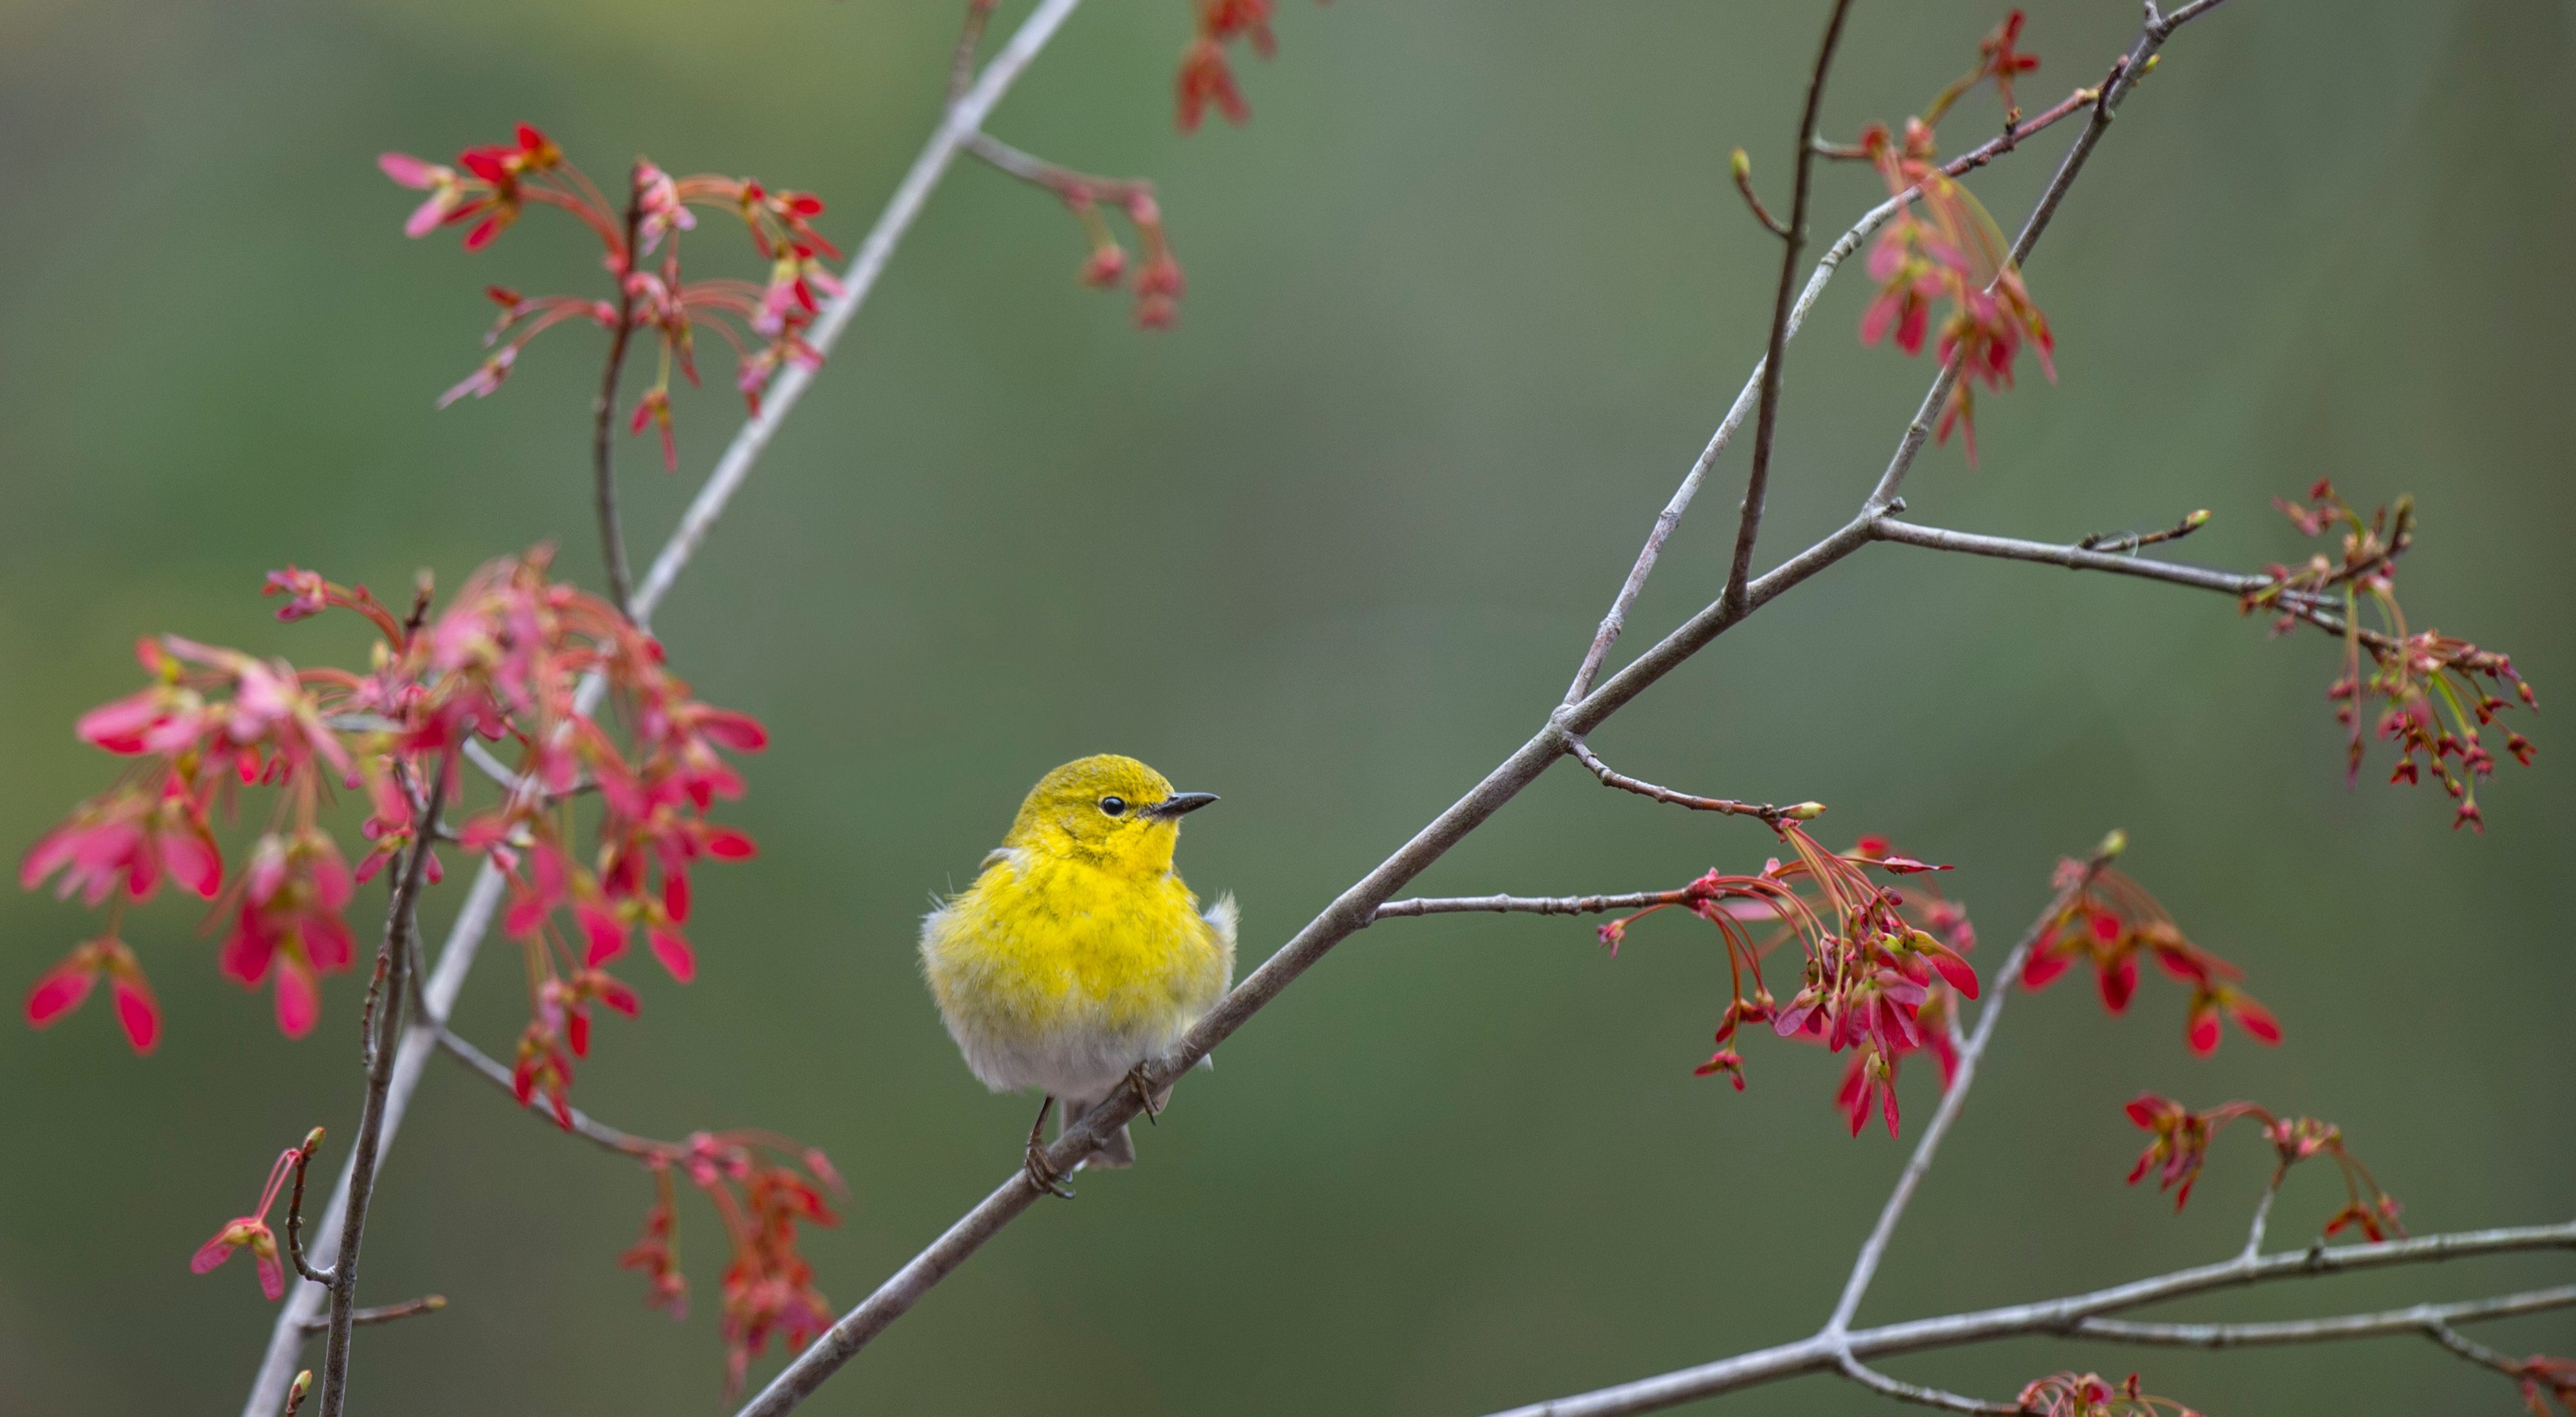 A pine warbler in a budding red maple tree. 